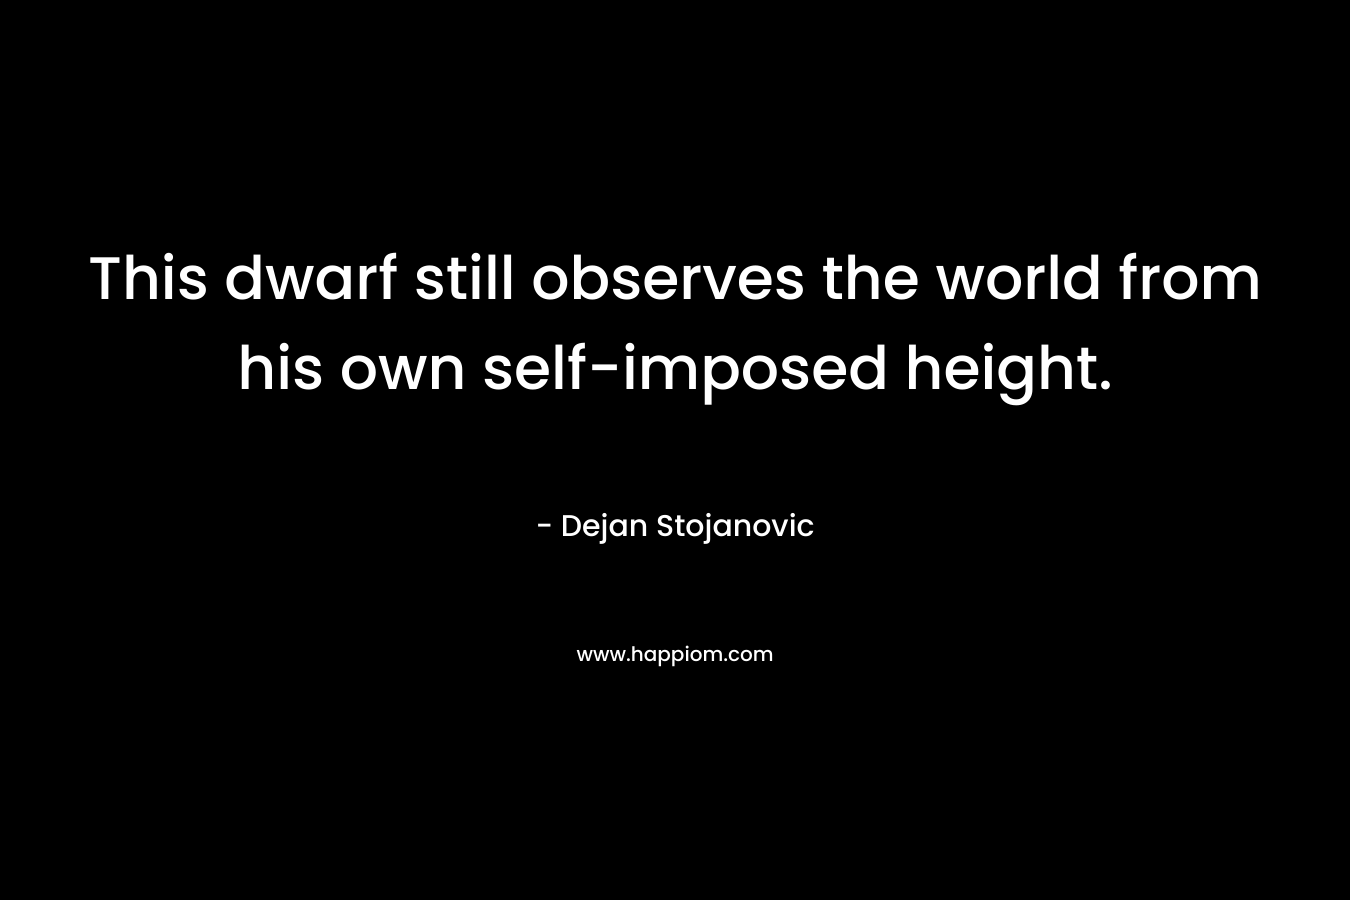 This dwarf still observes the world from his own self-imposed height. – Dejan Stojanovic